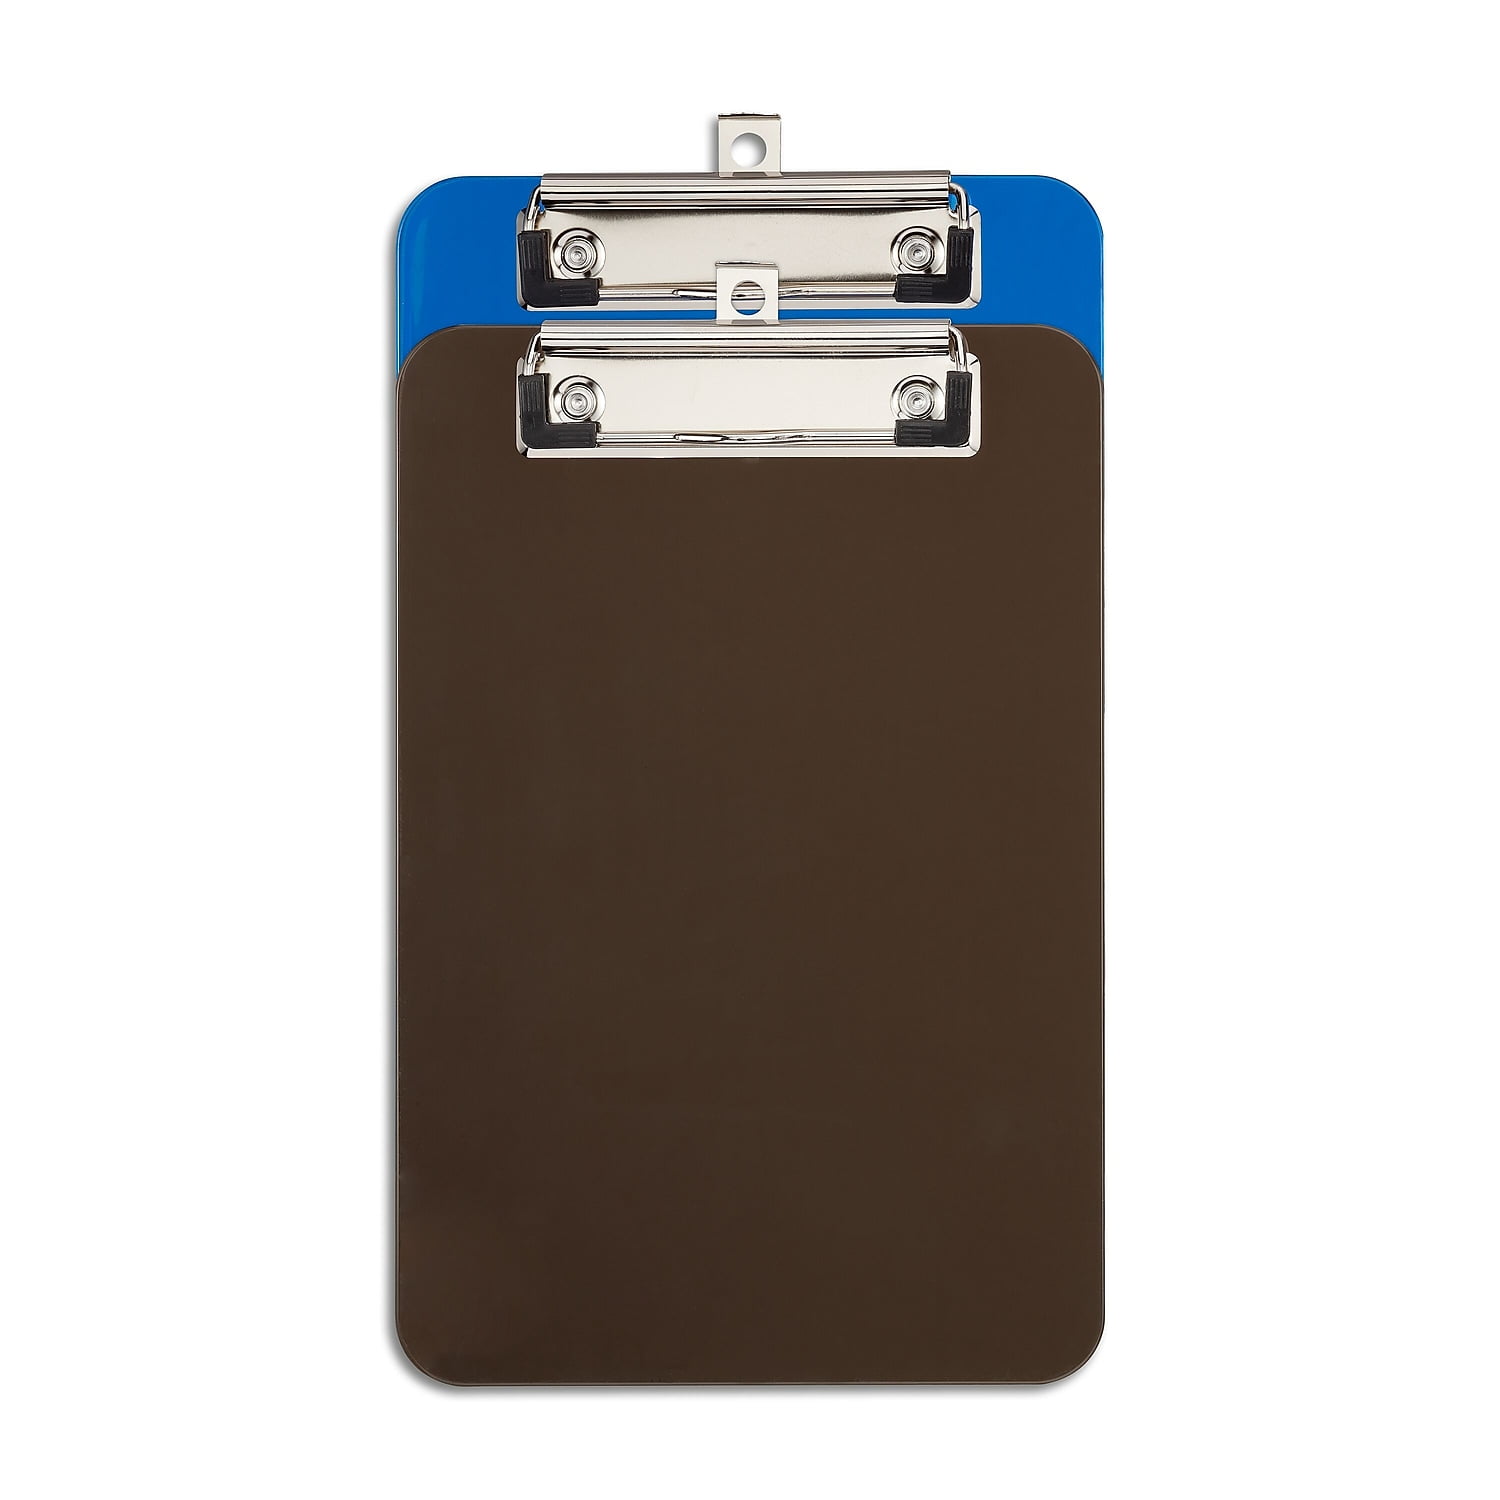 Officemate Recycled Wood Clipboard, Letter Size, Low Profile Clip, 9 x 12.5  Inches (83219), Each, Brown